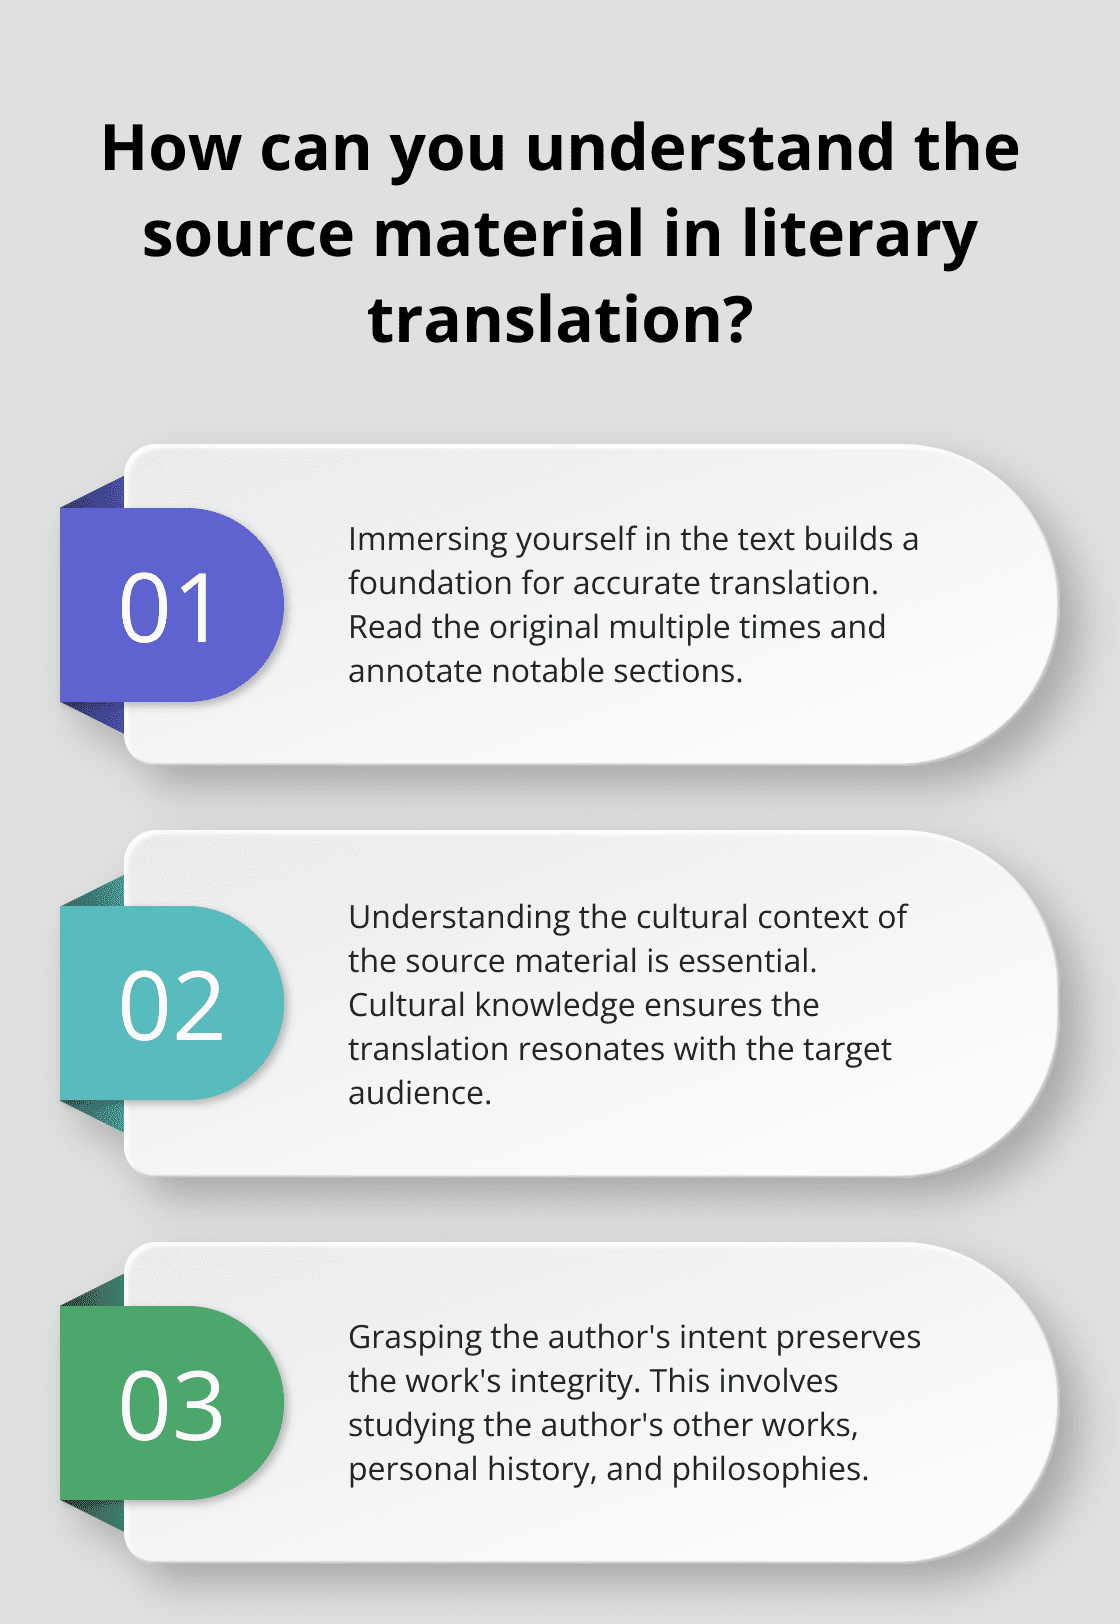 Fact - How can you understand the source material in literary translation?